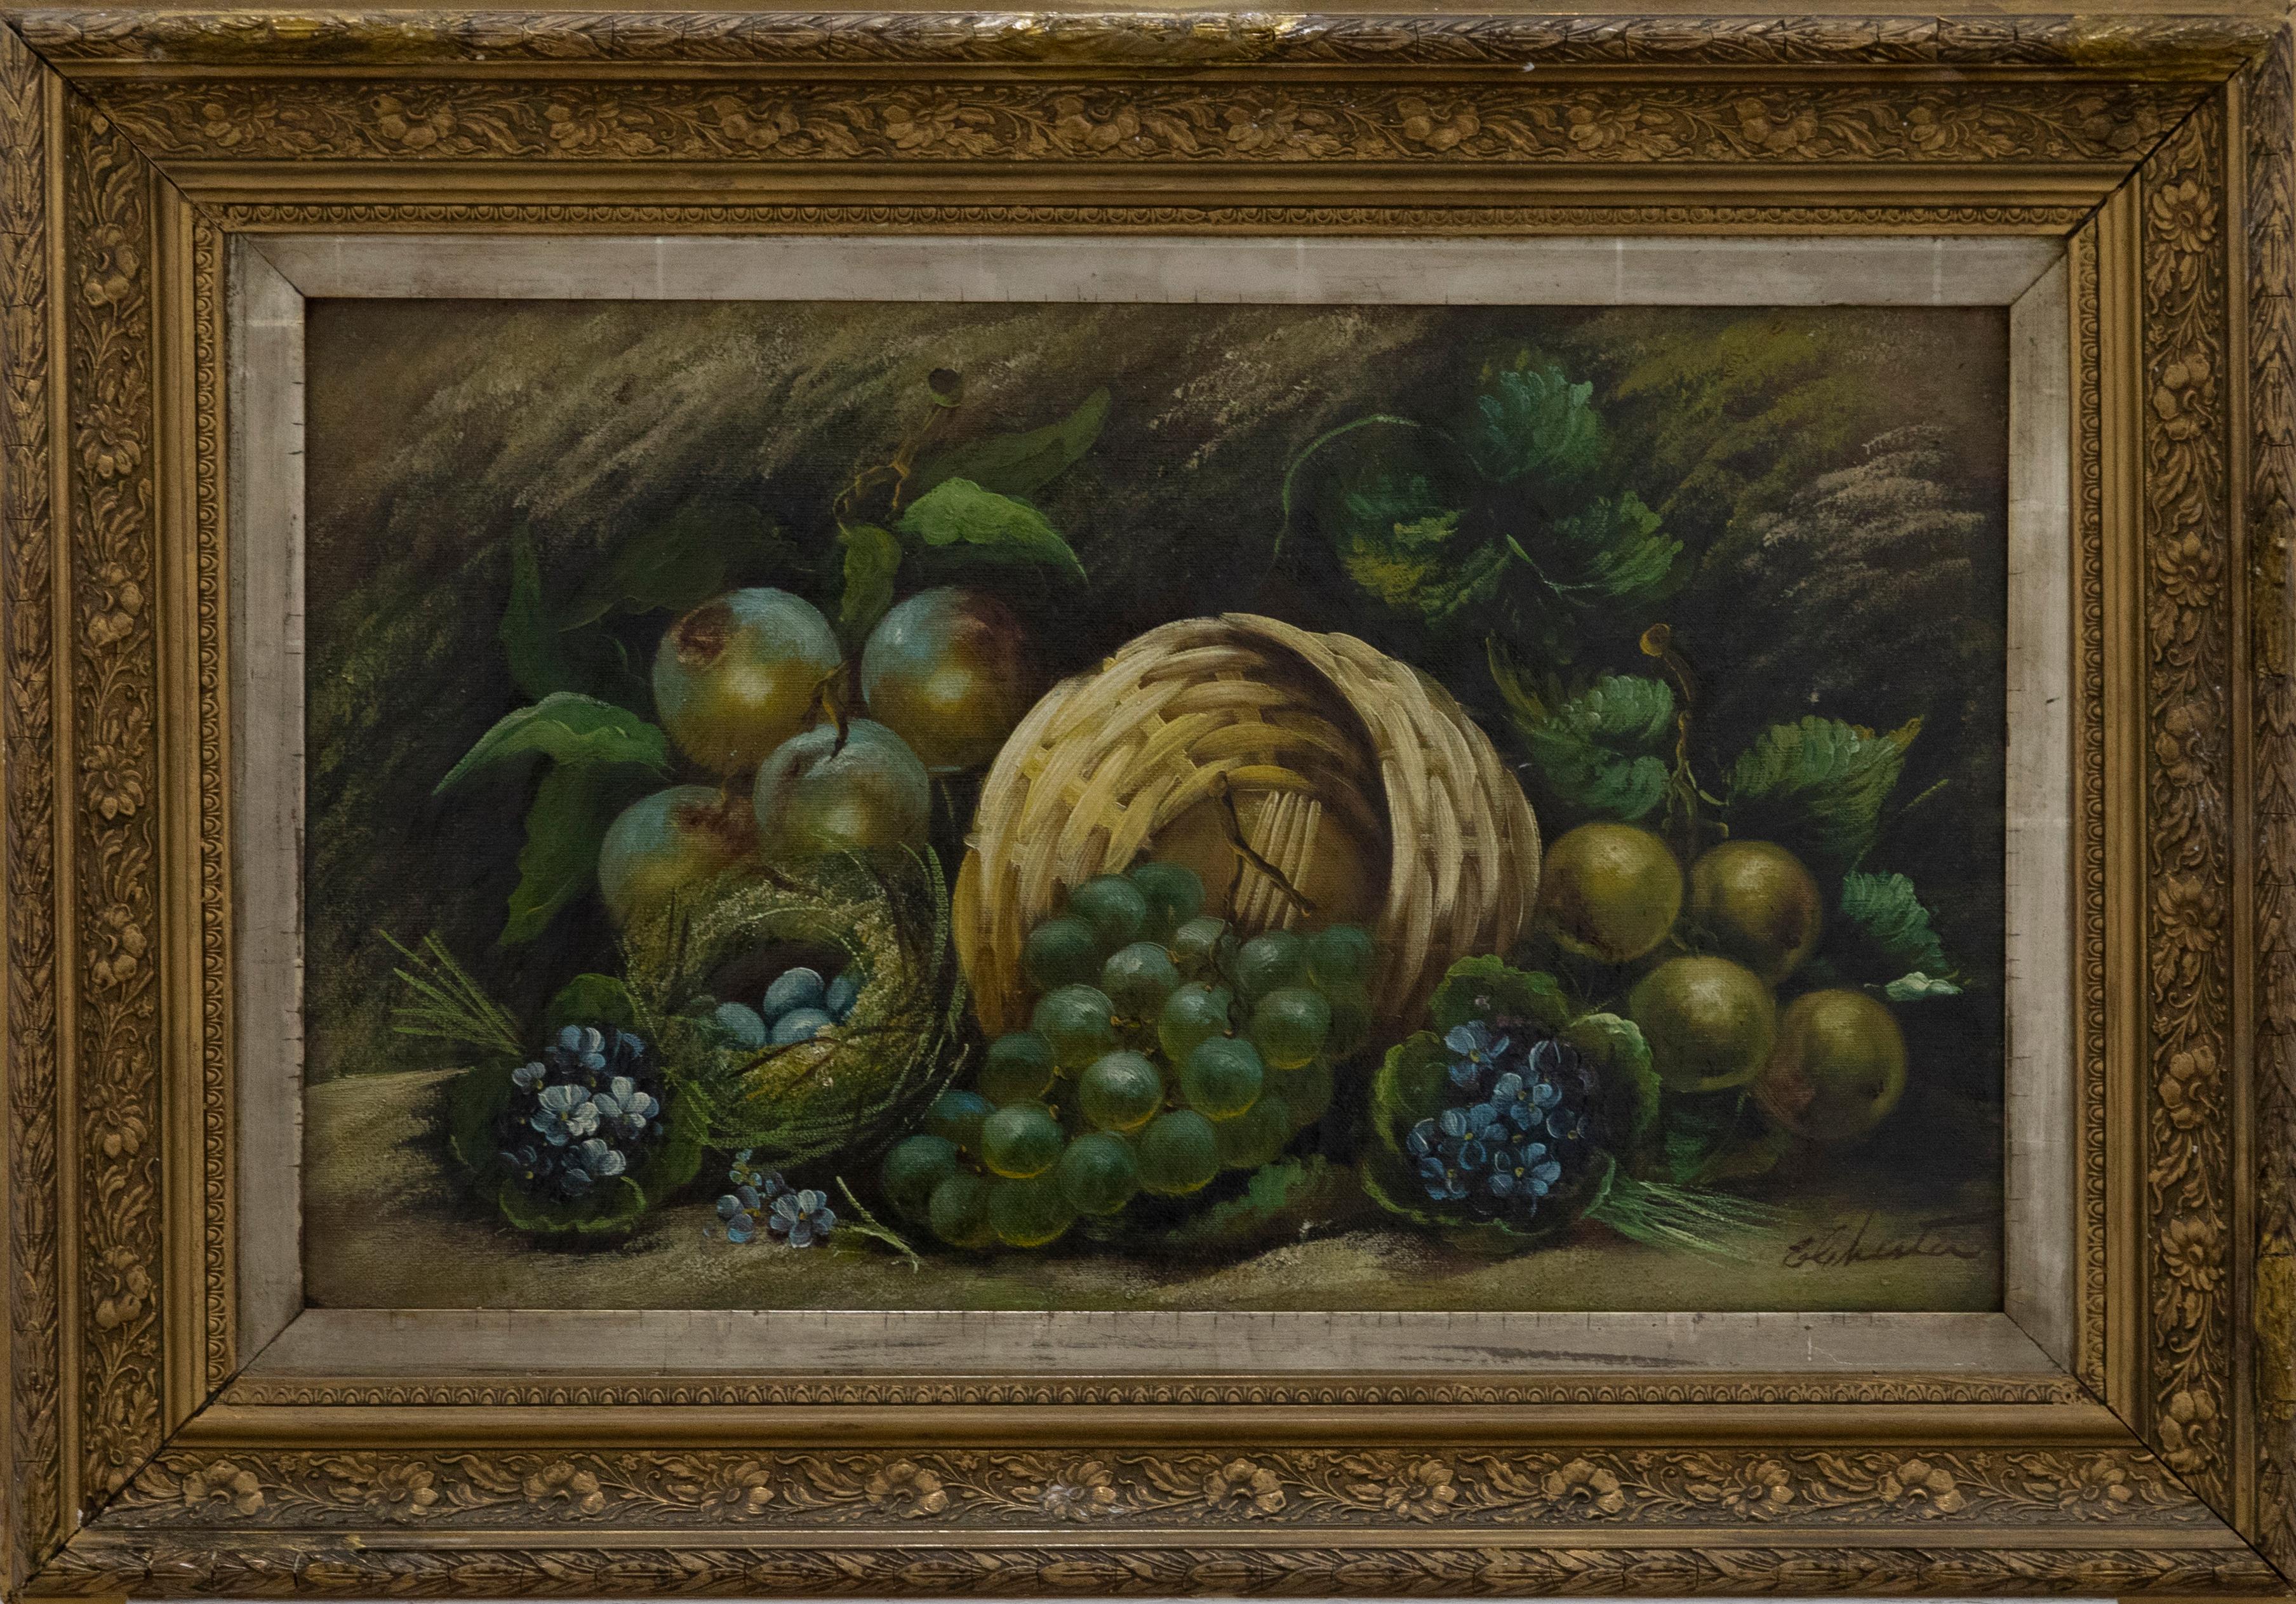 A charming still life study depicting a basket of grapes surrounded by cab apples and posies of forget-me-nots. Signed to the lower right. Presented in a decorative gilt frame with floral, laurel l and lambs tongue running patterns. On canvas. 
